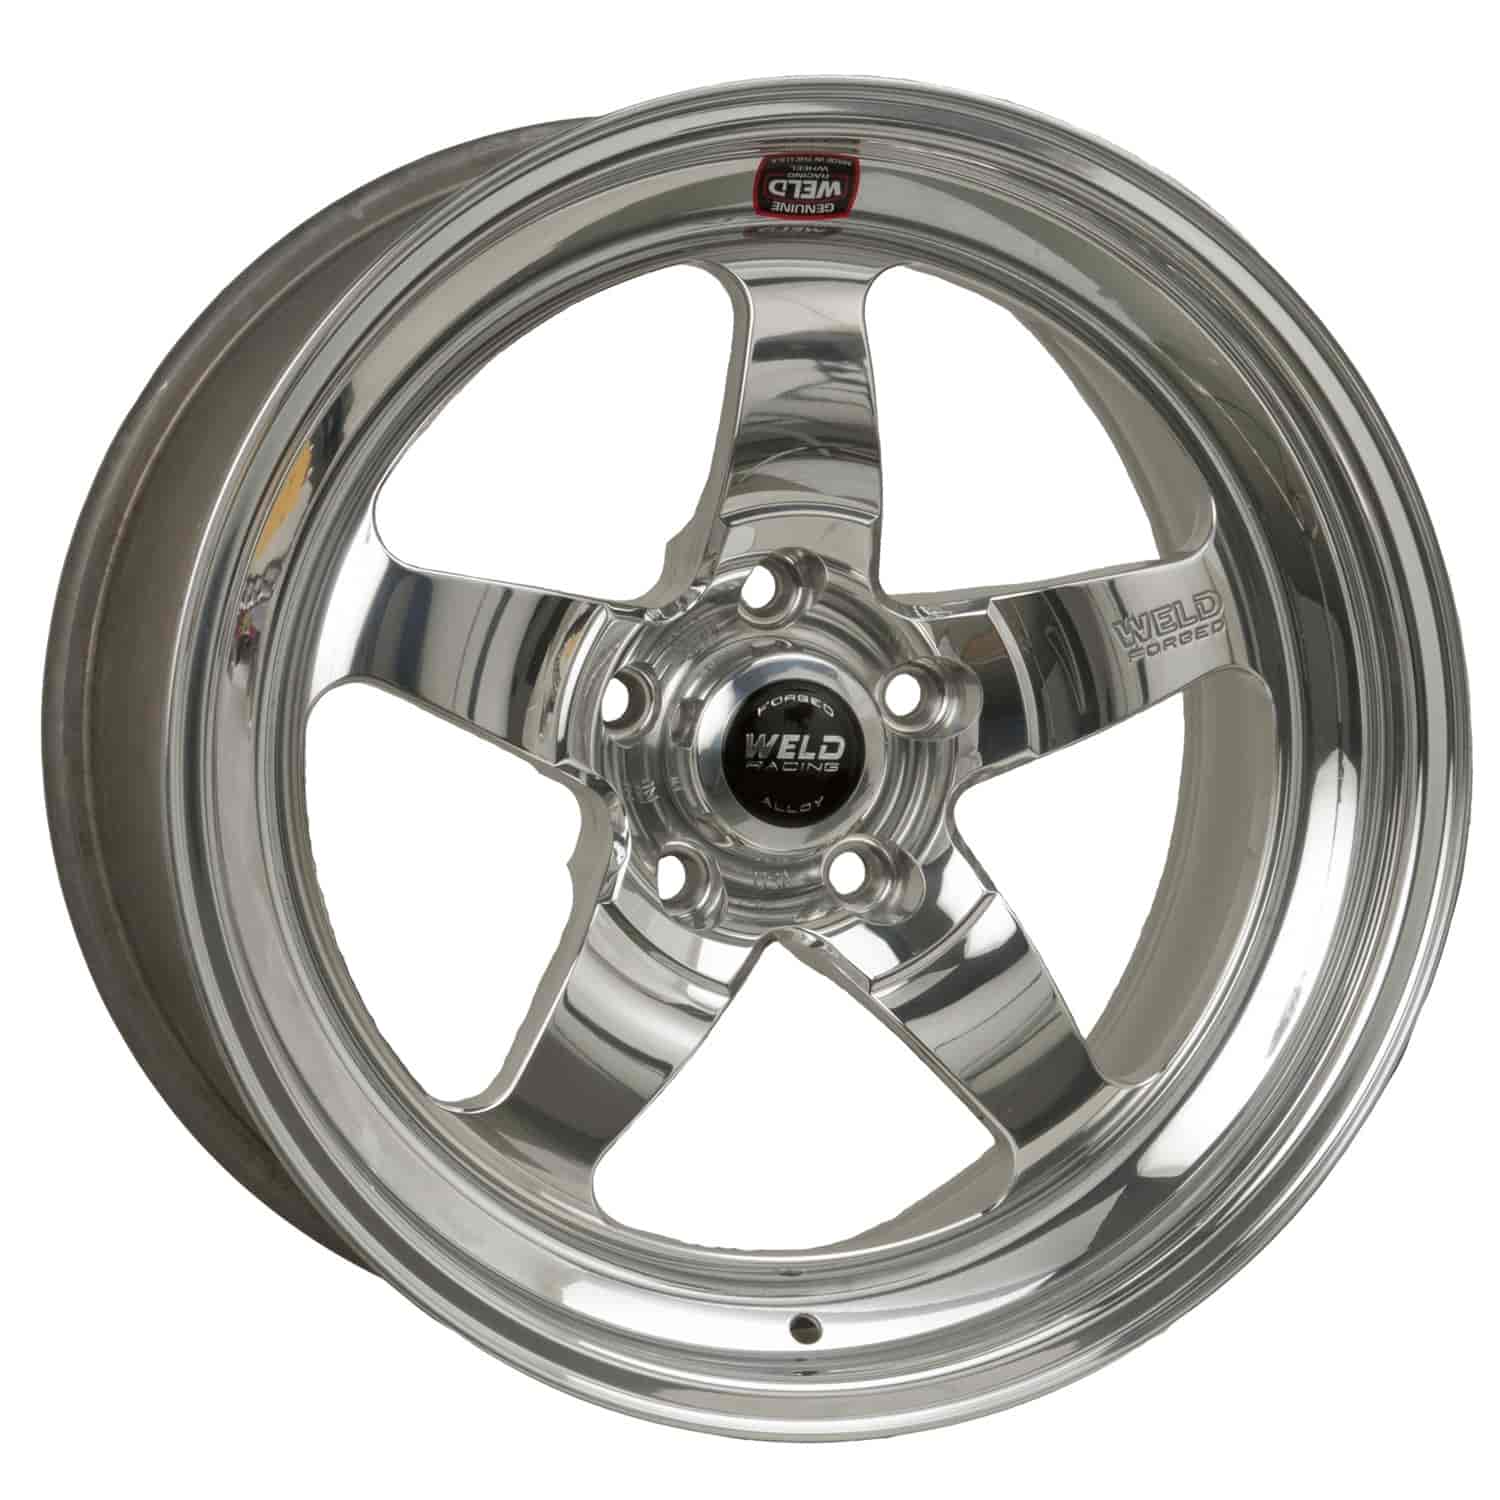 RT-S Series Wheel Size: 17" x 10" Bolt Circle: 5 x 115mm Rear Spacing: 6.70" Polished